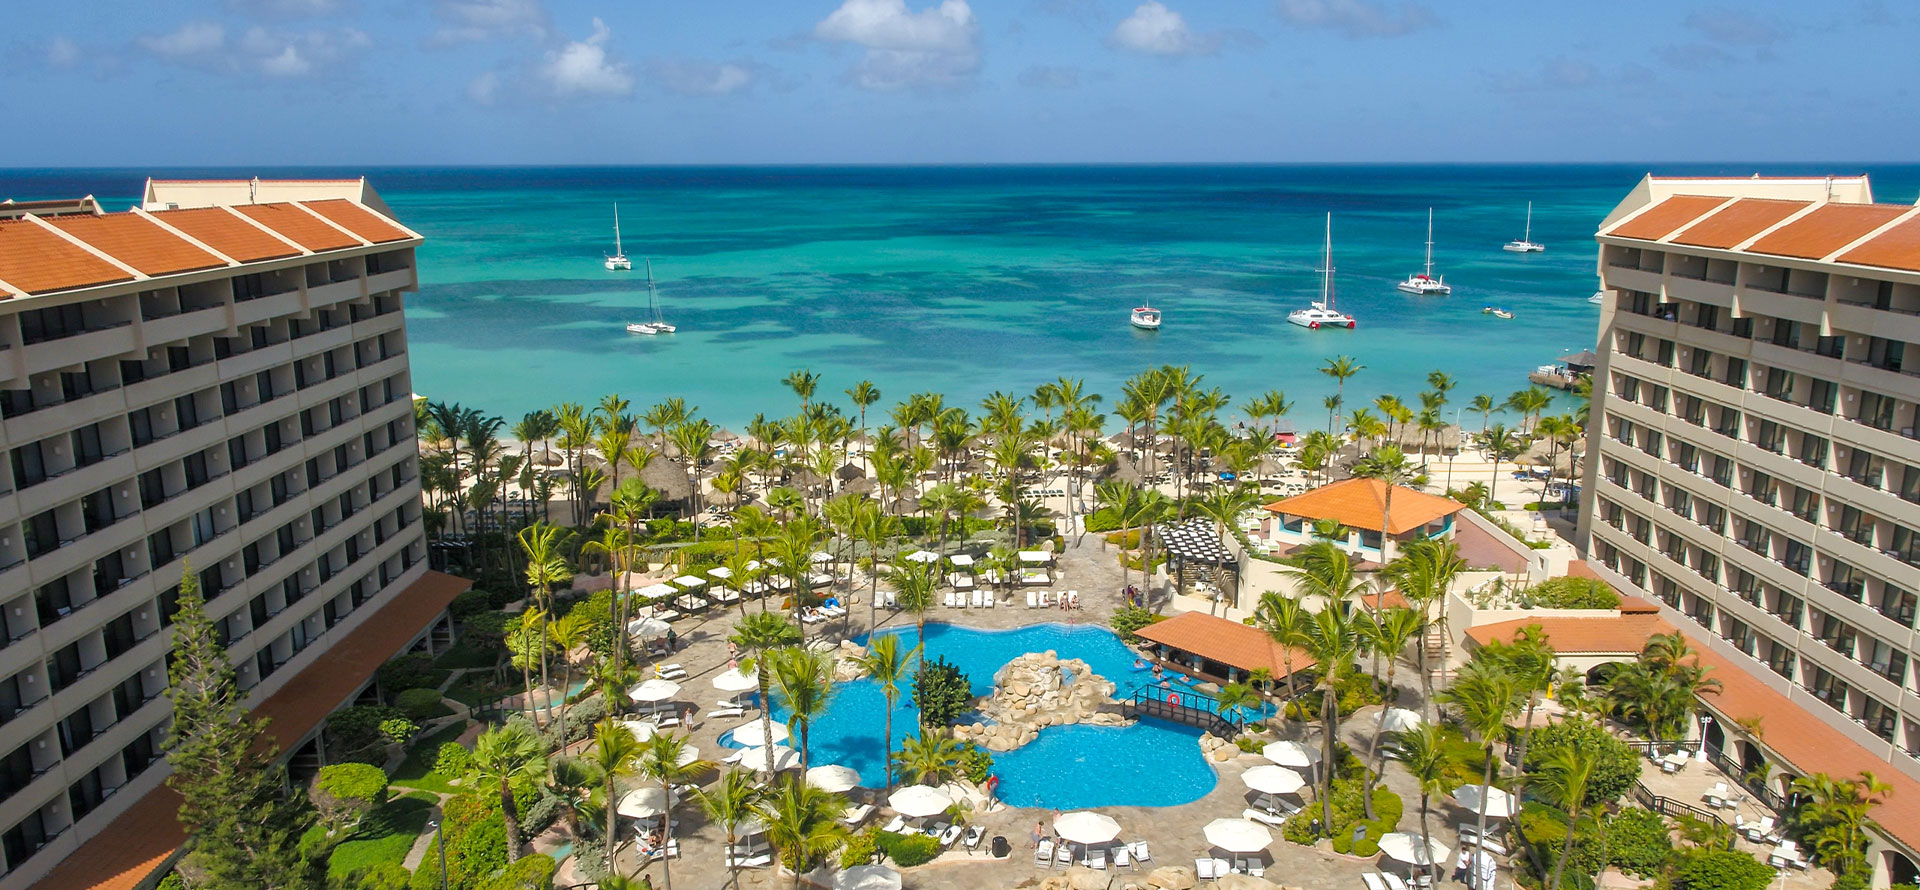 Aruba all-inclusive adults only resort.